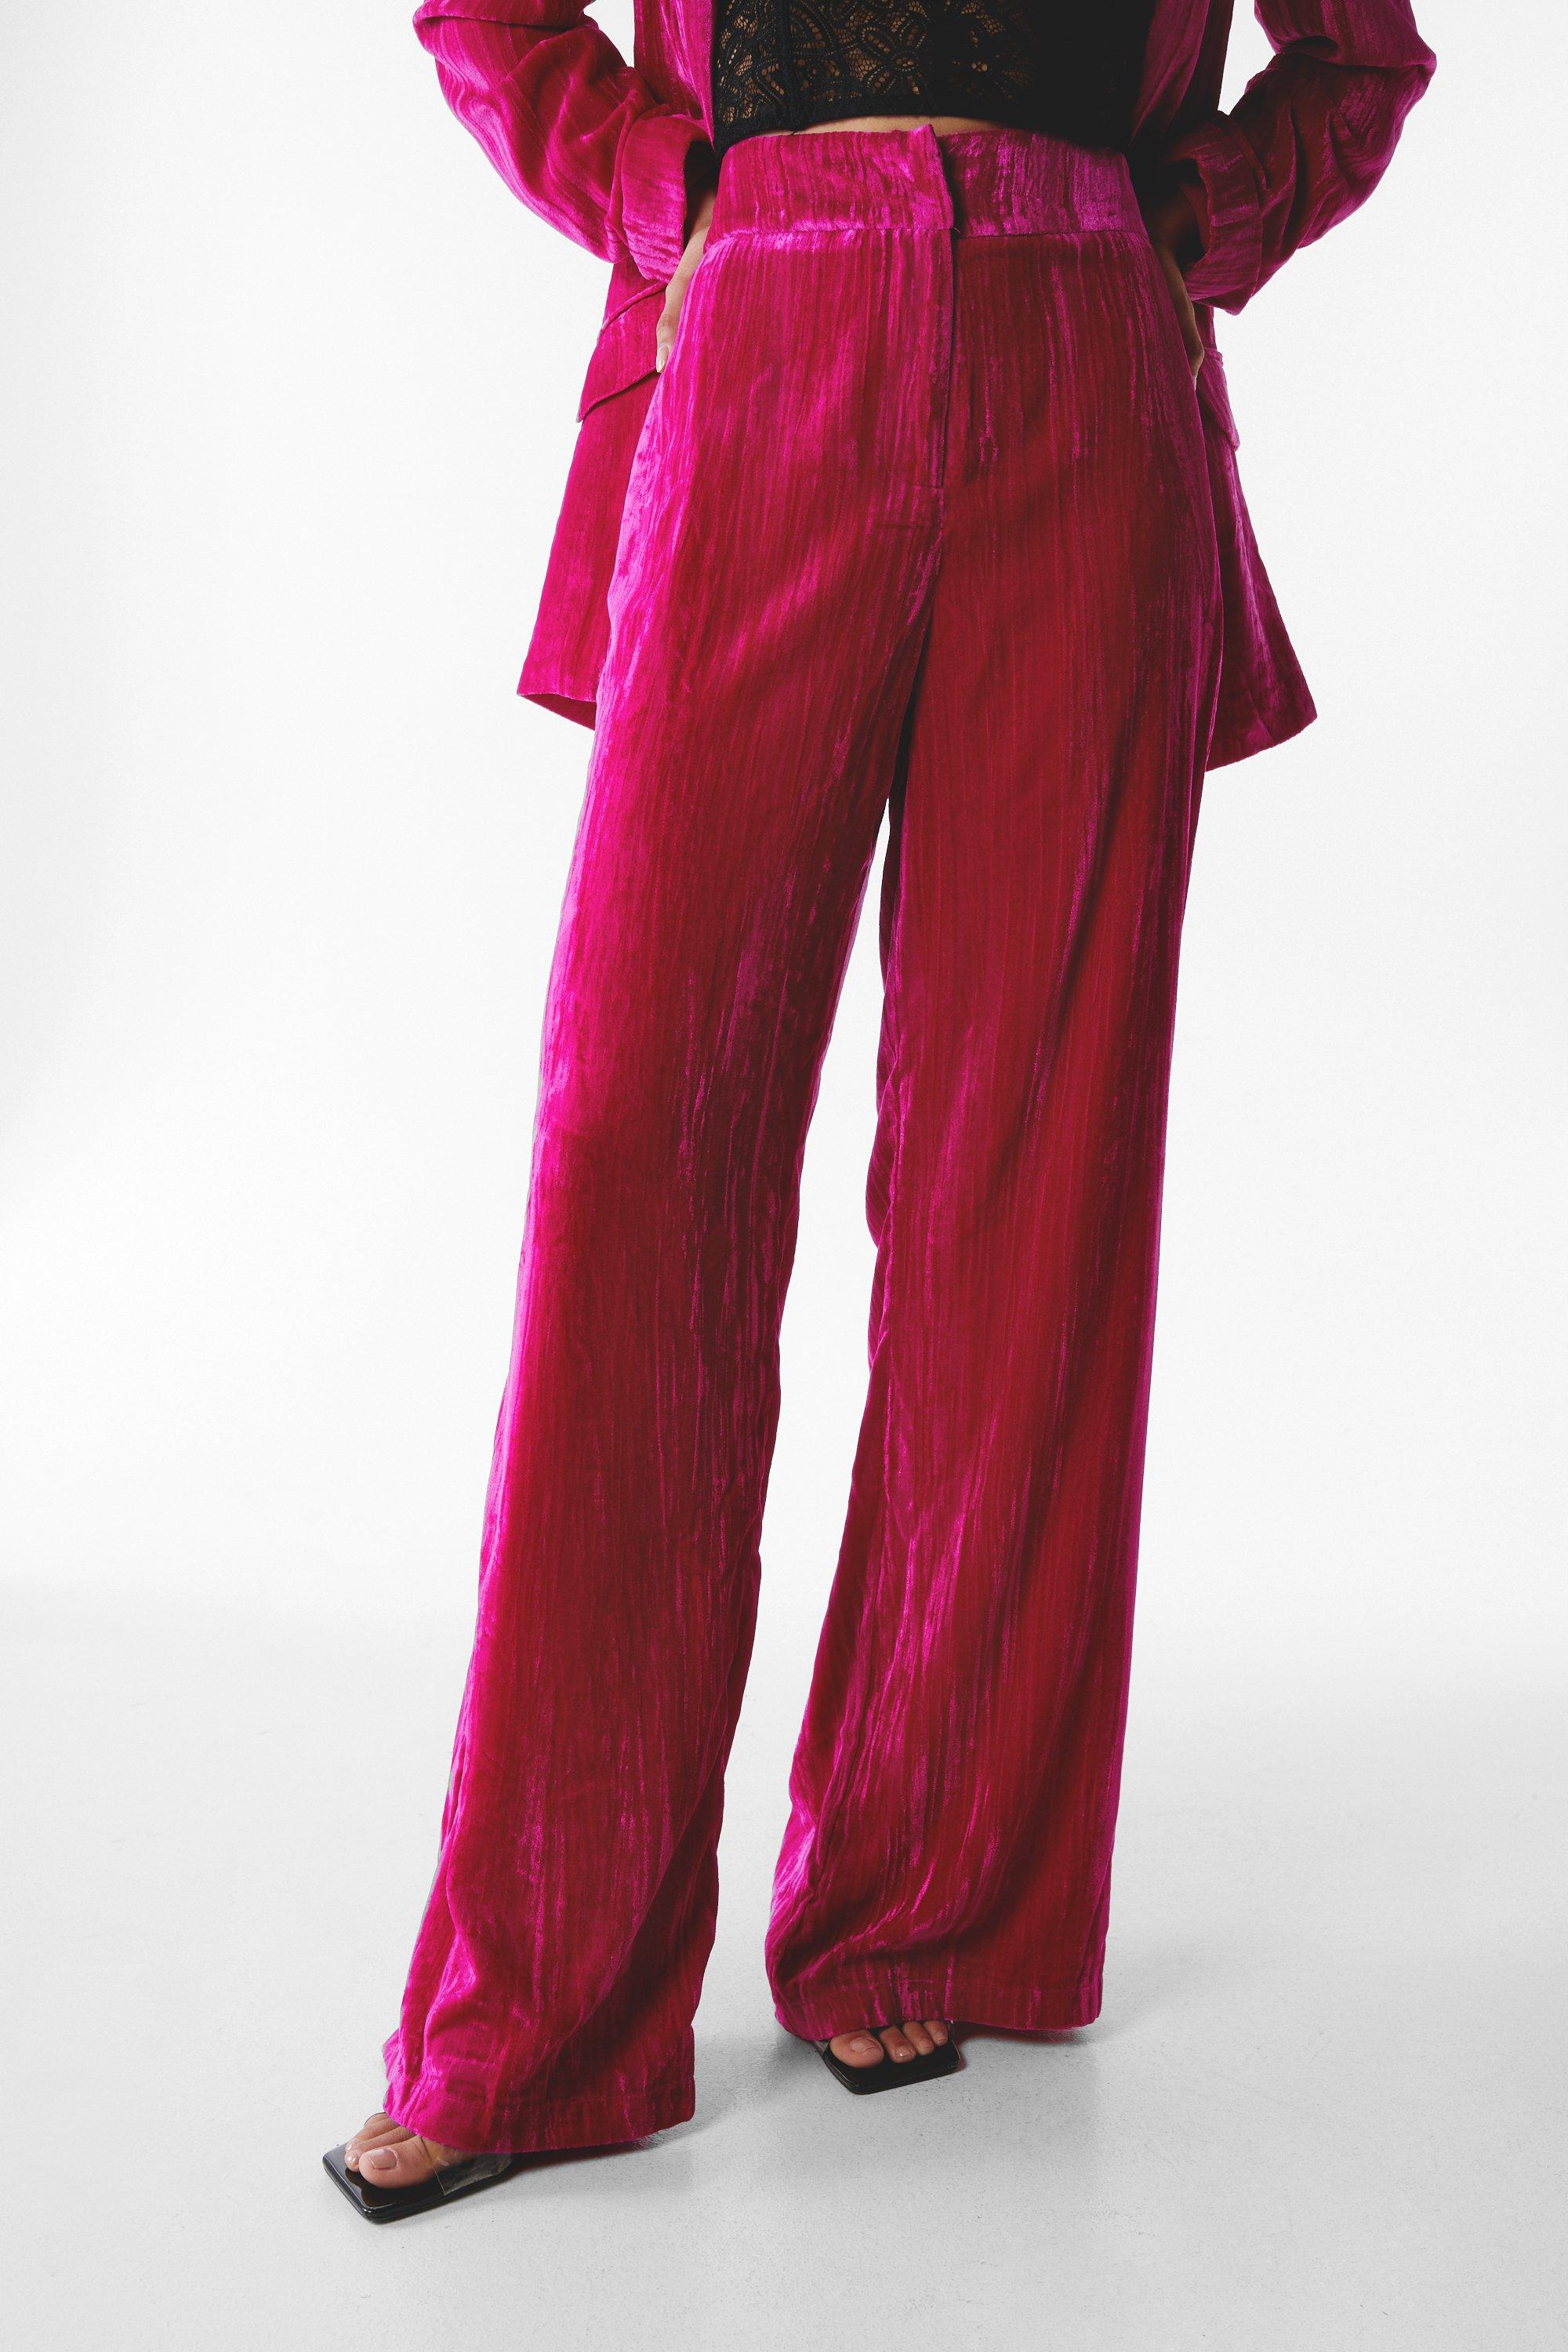 Taking the Reigns Red Crushed Velvet High-Waisted Wide Leg Pants